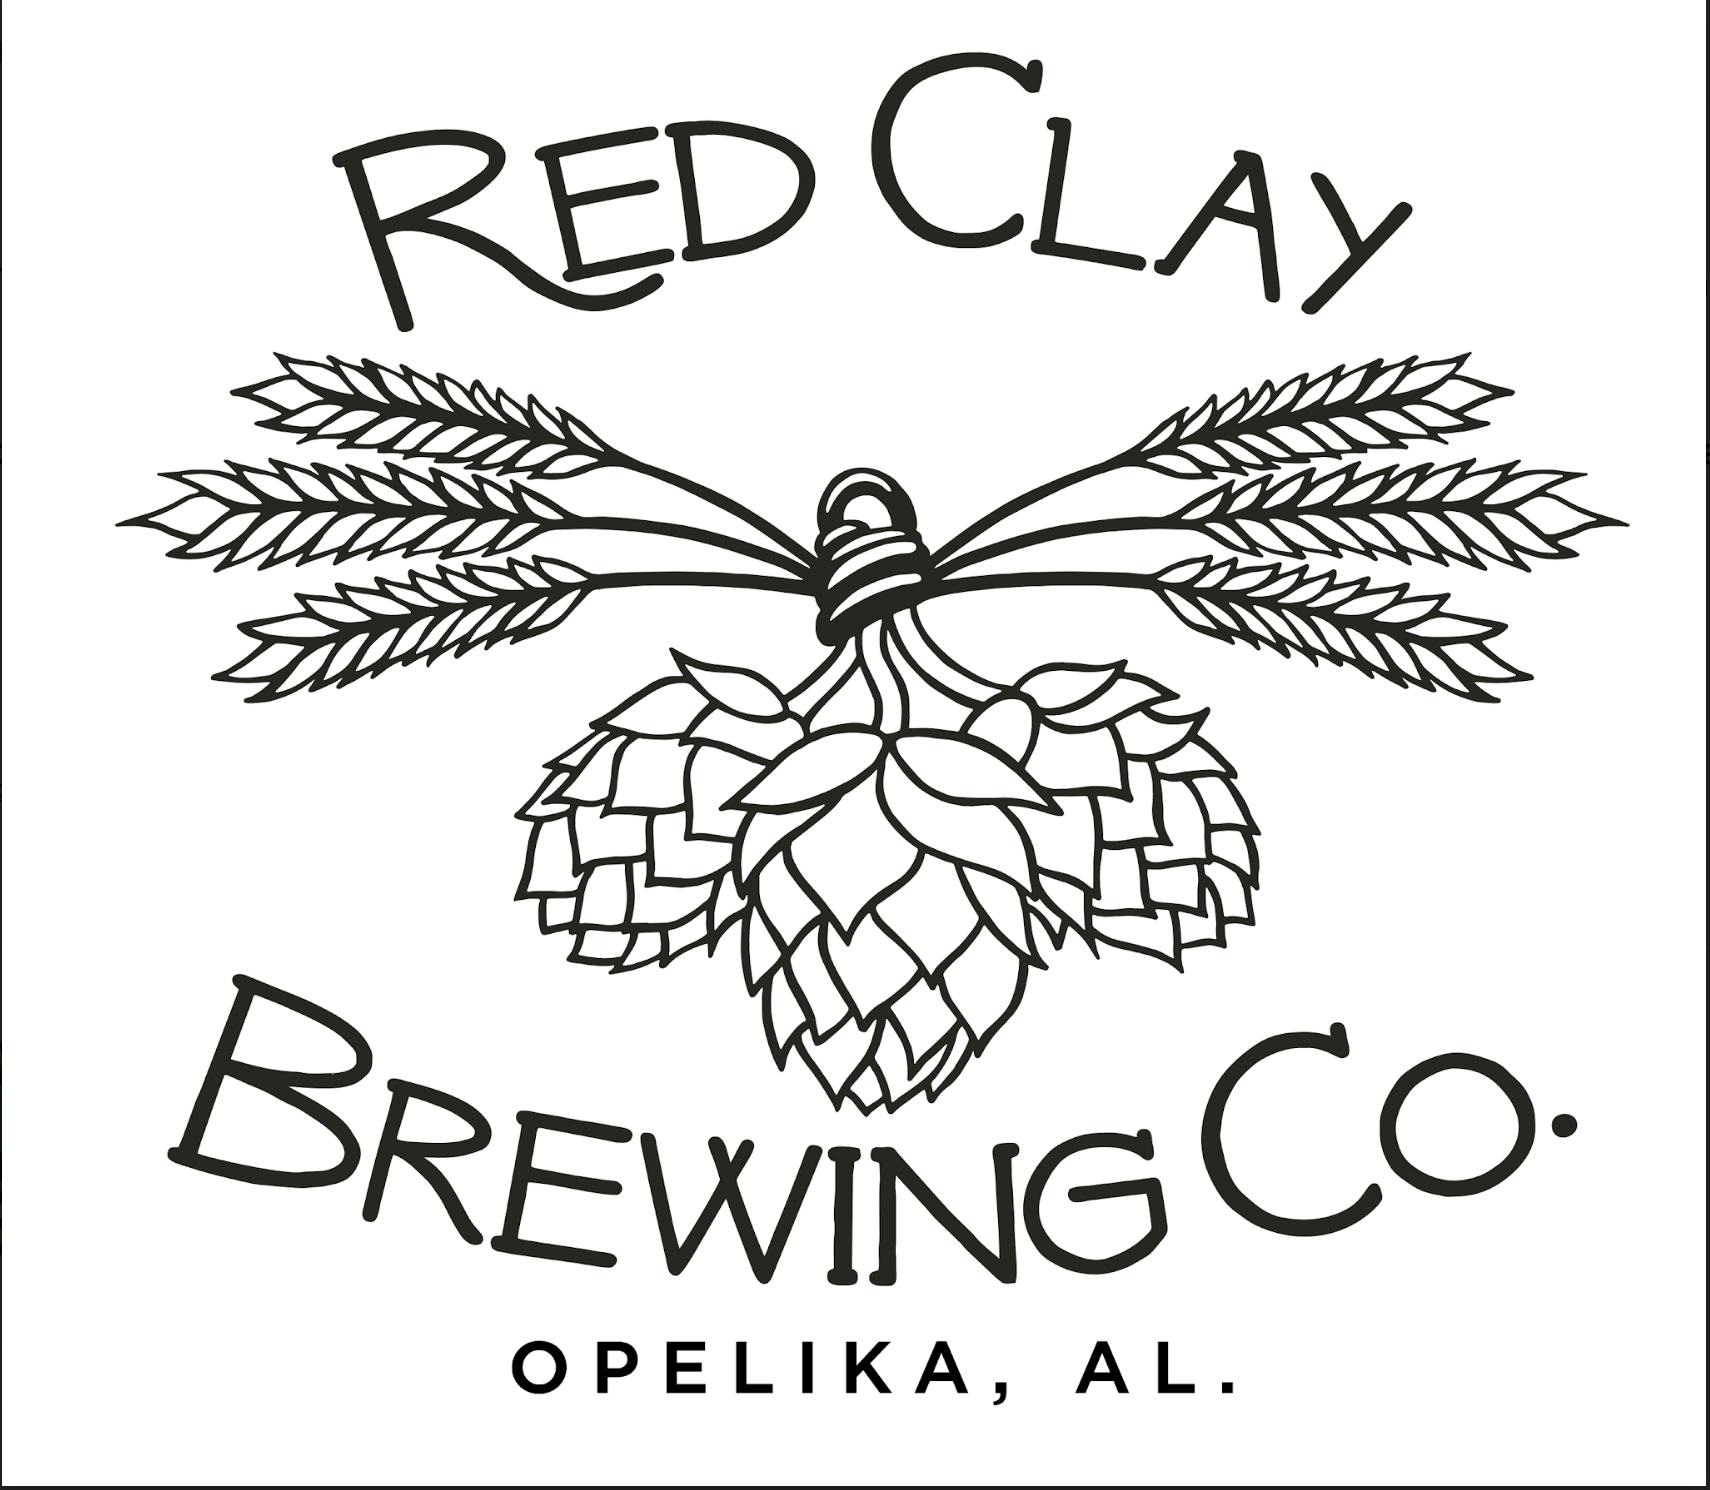 The Session | Red Clay Brewing Company